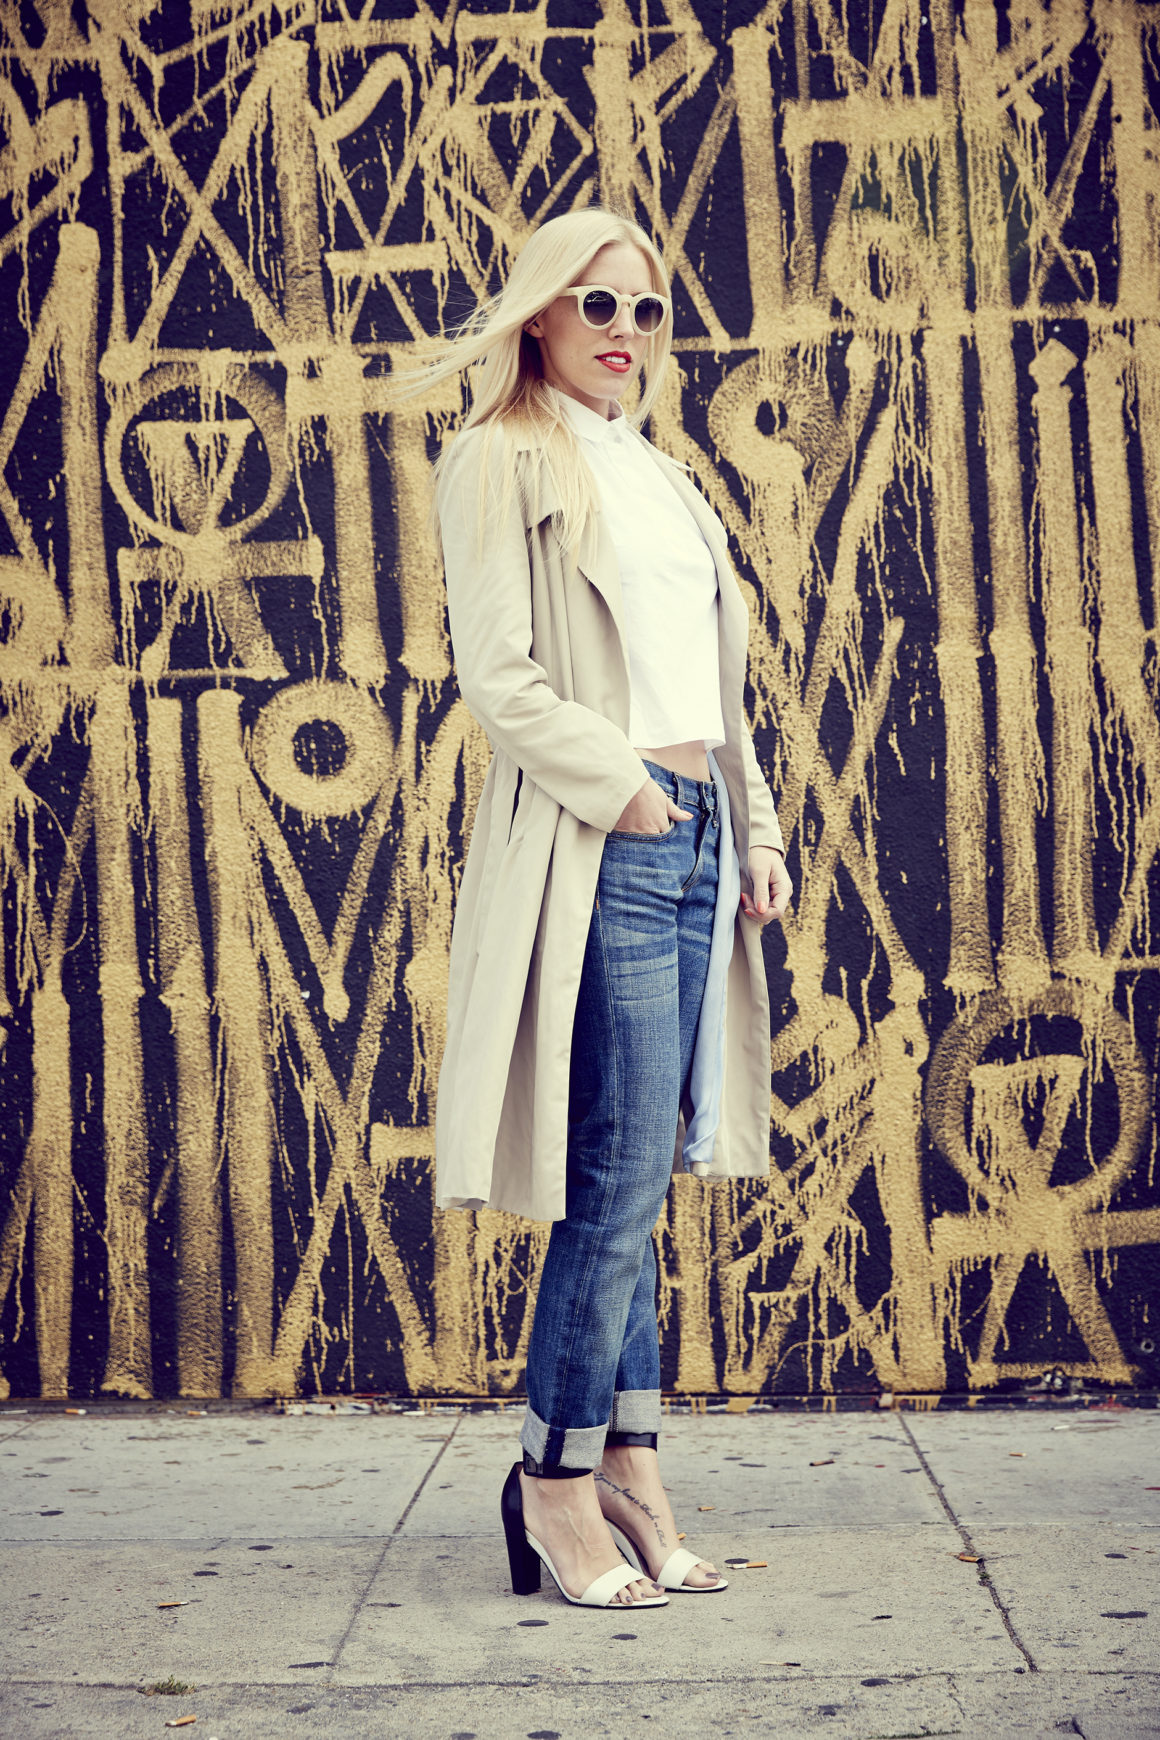 Trench Trend + A Retna Mural